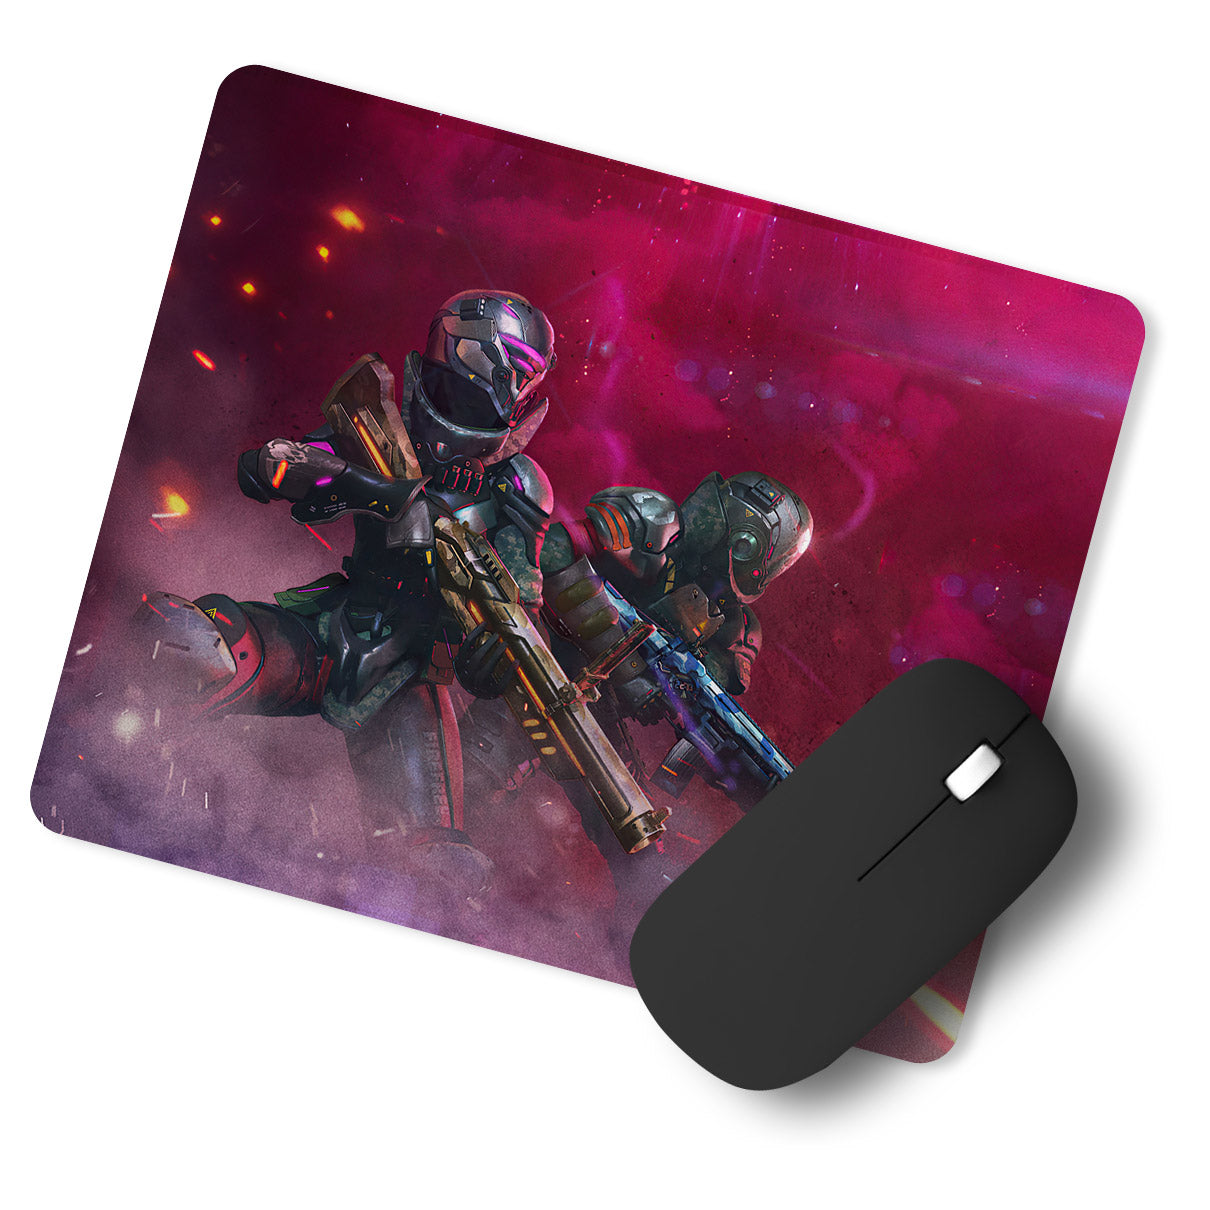 Robot Fighter Designer Printed Premium Mouse pad (9 in x 7.5 in)